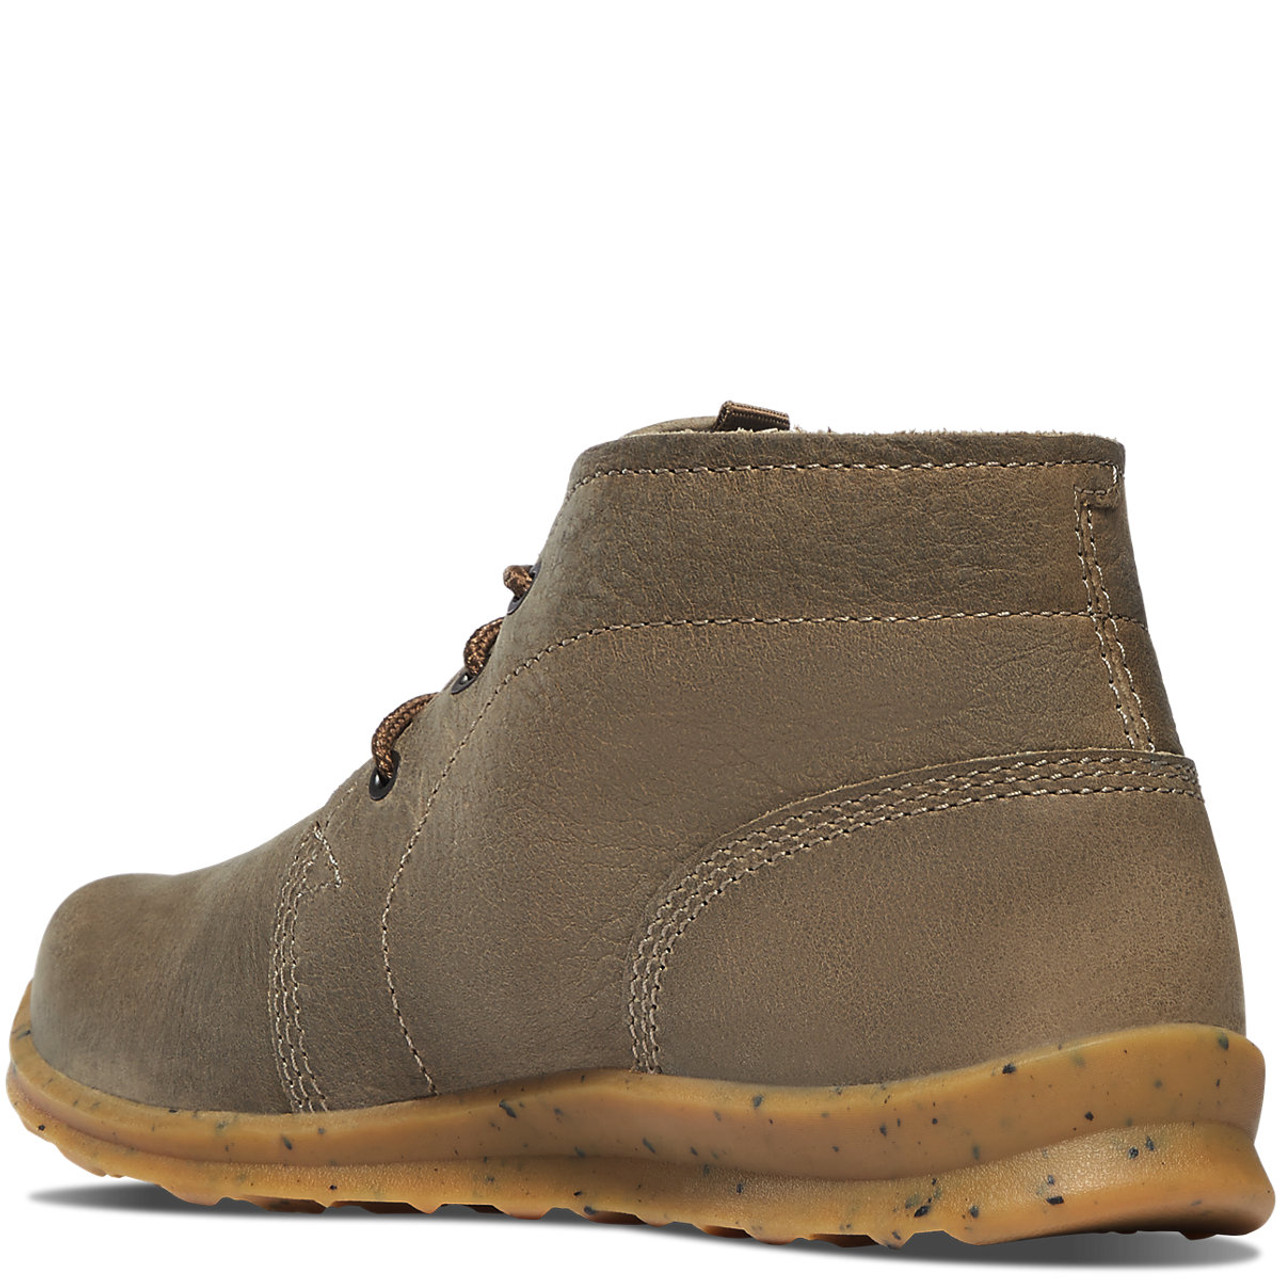 DANNER® FOREST CHUKKA WOMEN'S SIZING TIMBERWOLF LIFESTYLE BOOTS 37642